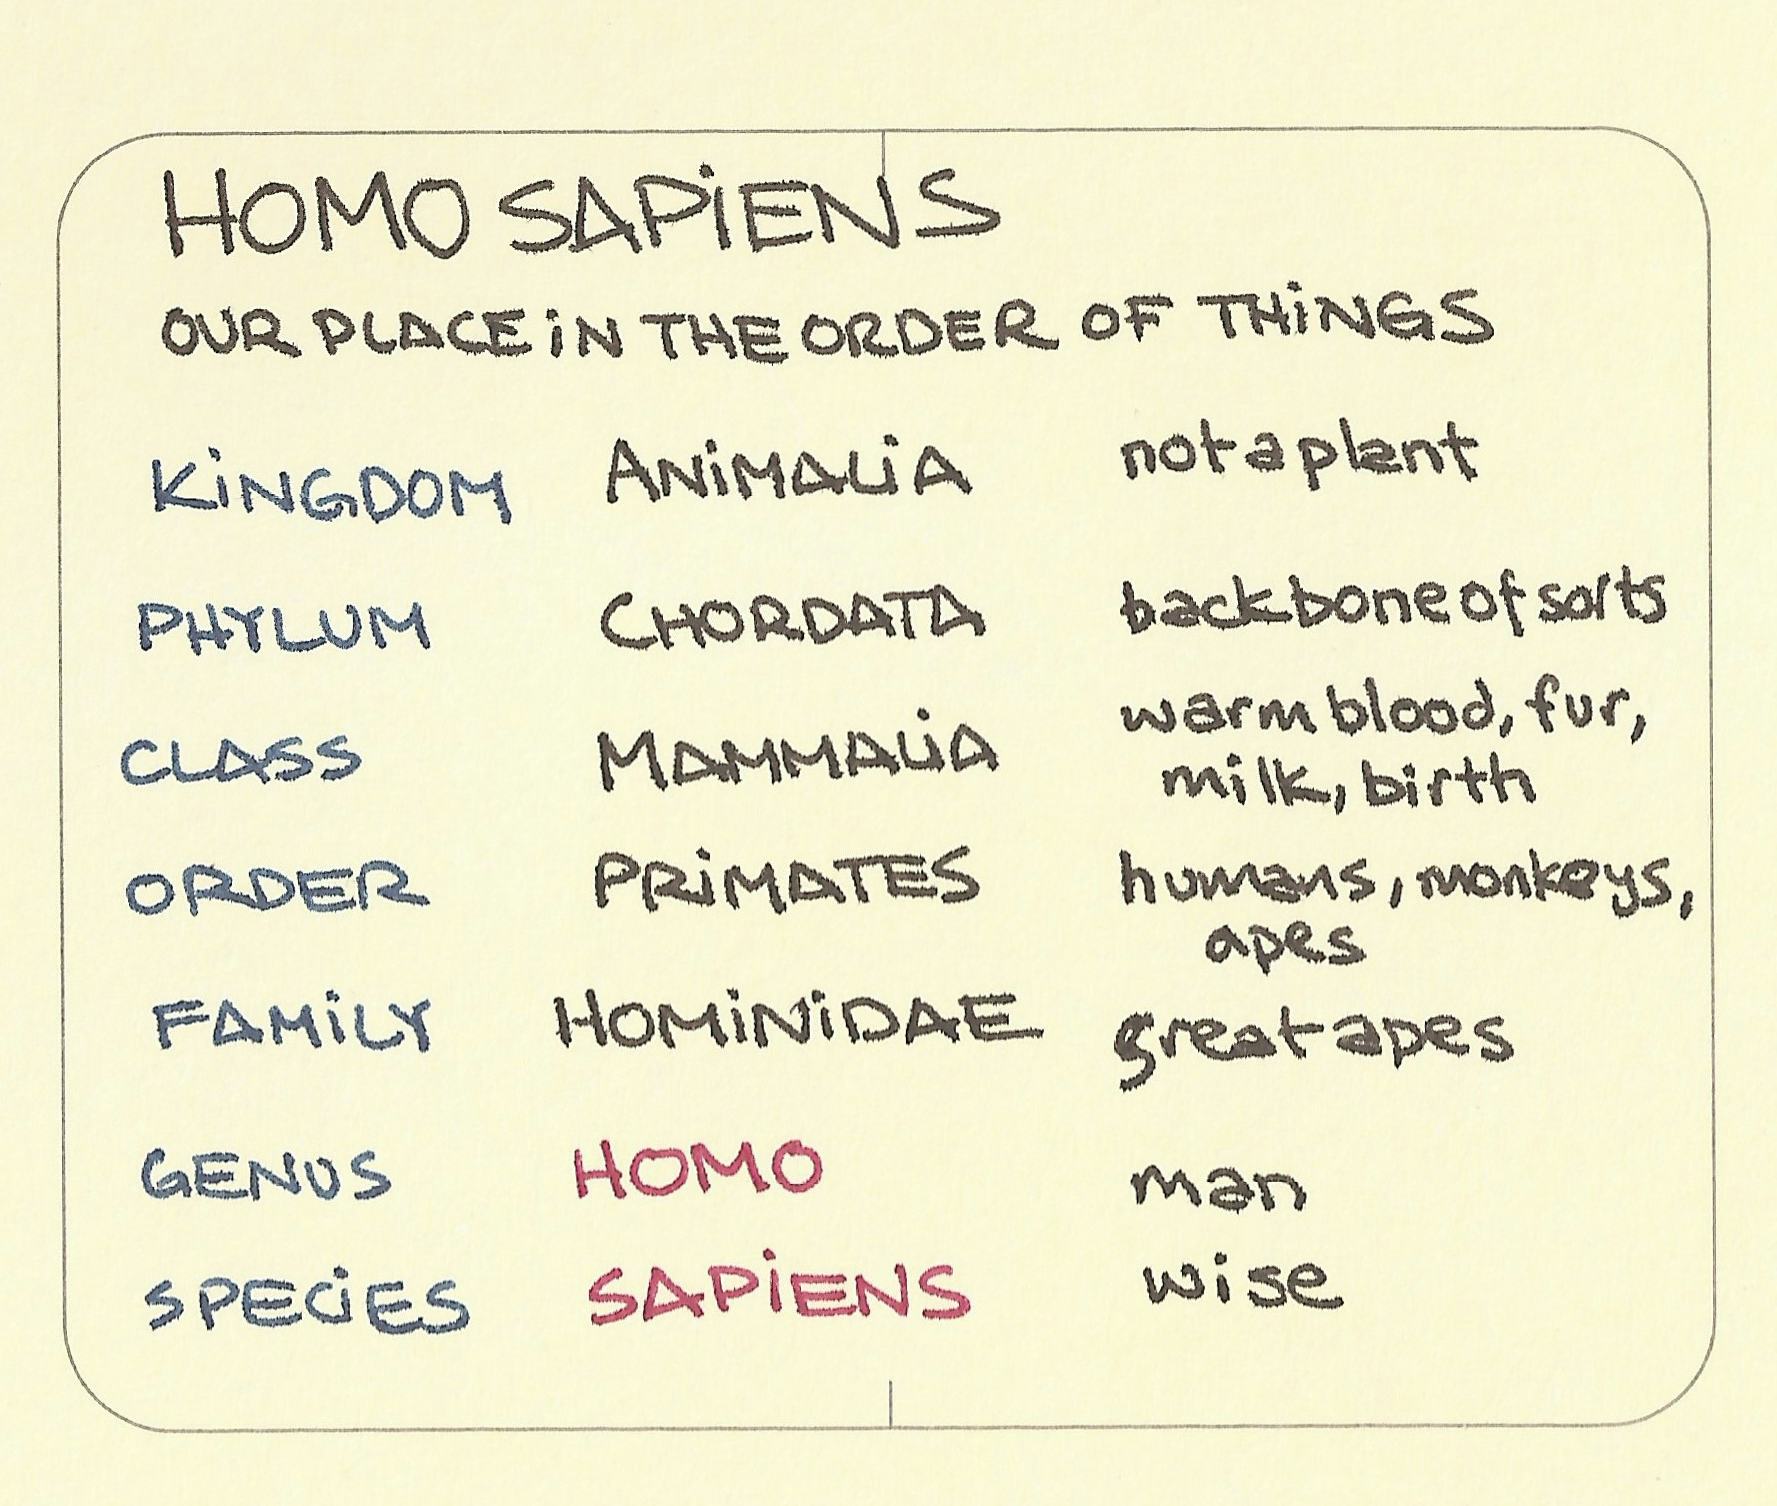 Homo sapiens. Our place in the order of things - Sketchplanations